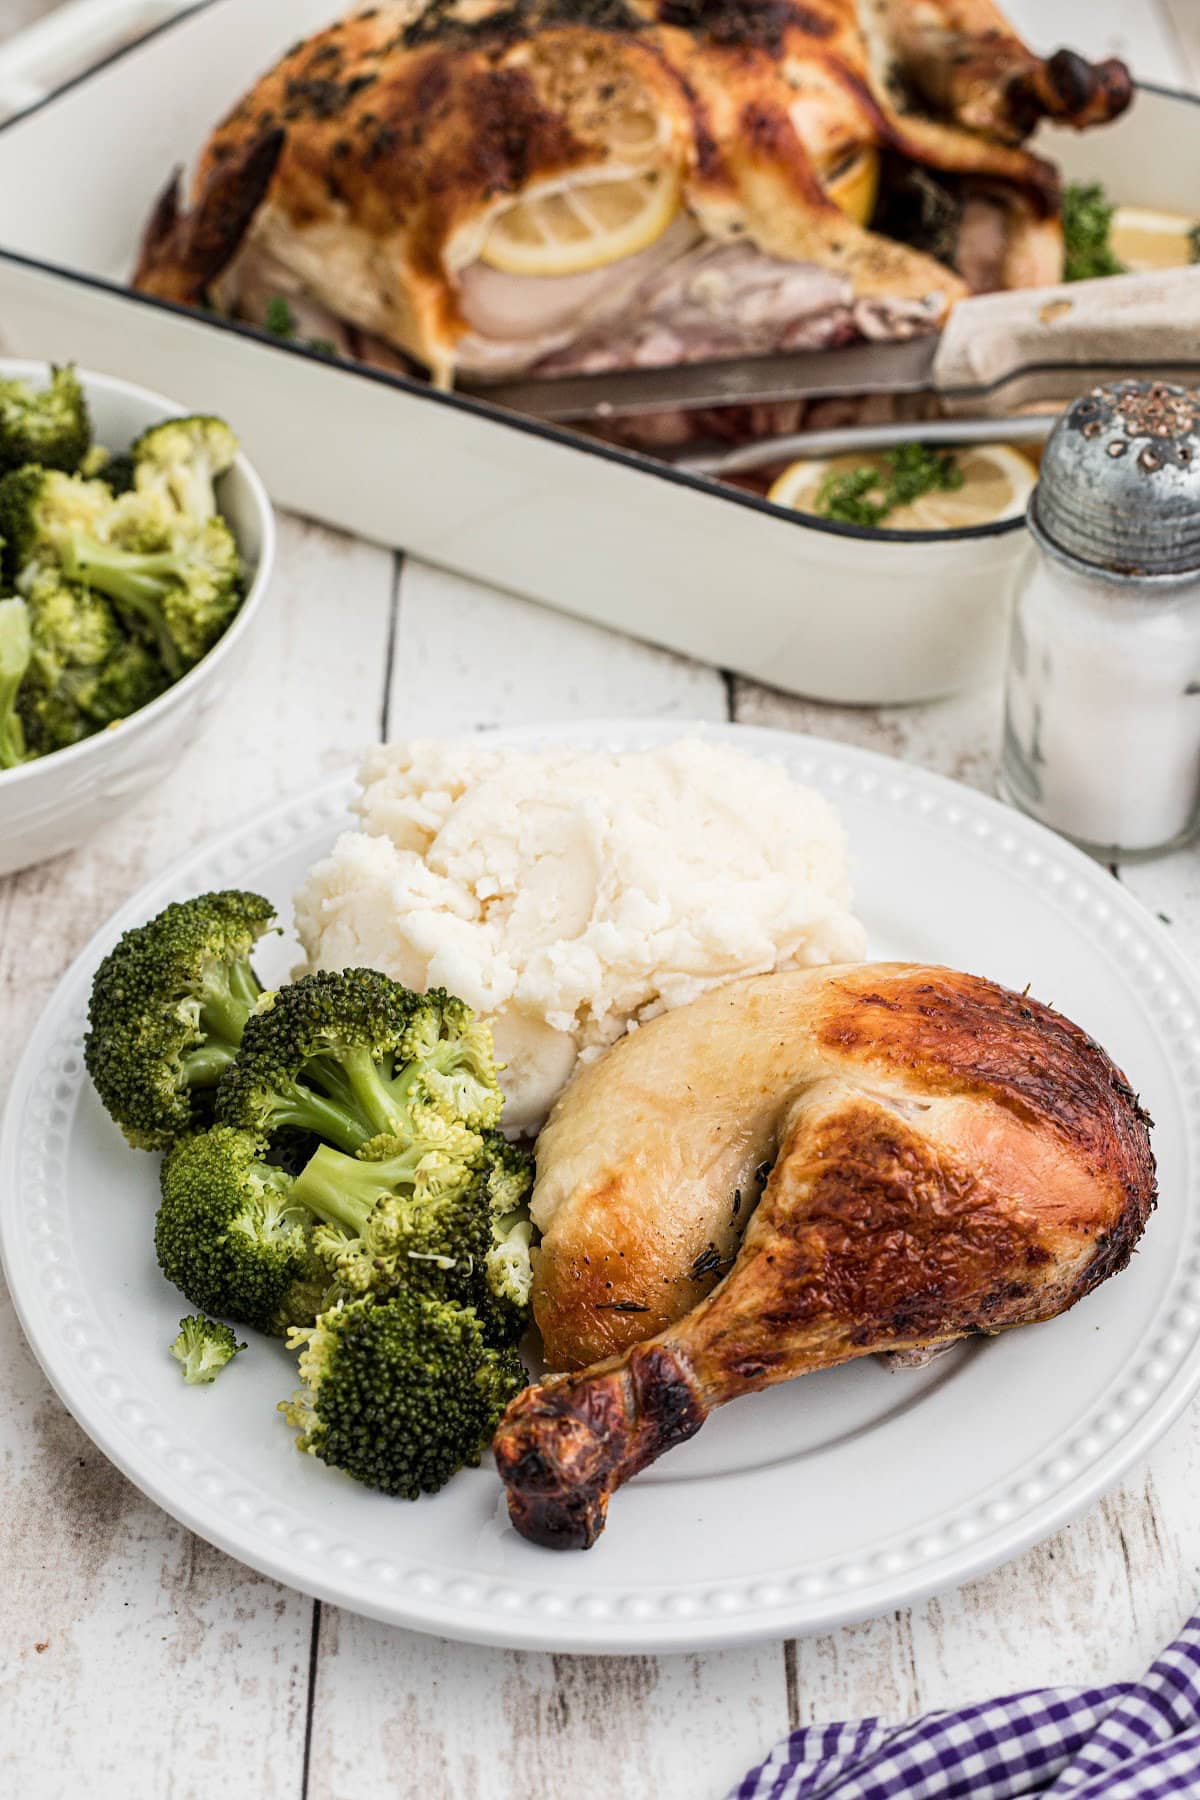 A serving of roast chicken on a white plate with broccoli and mash potatoes